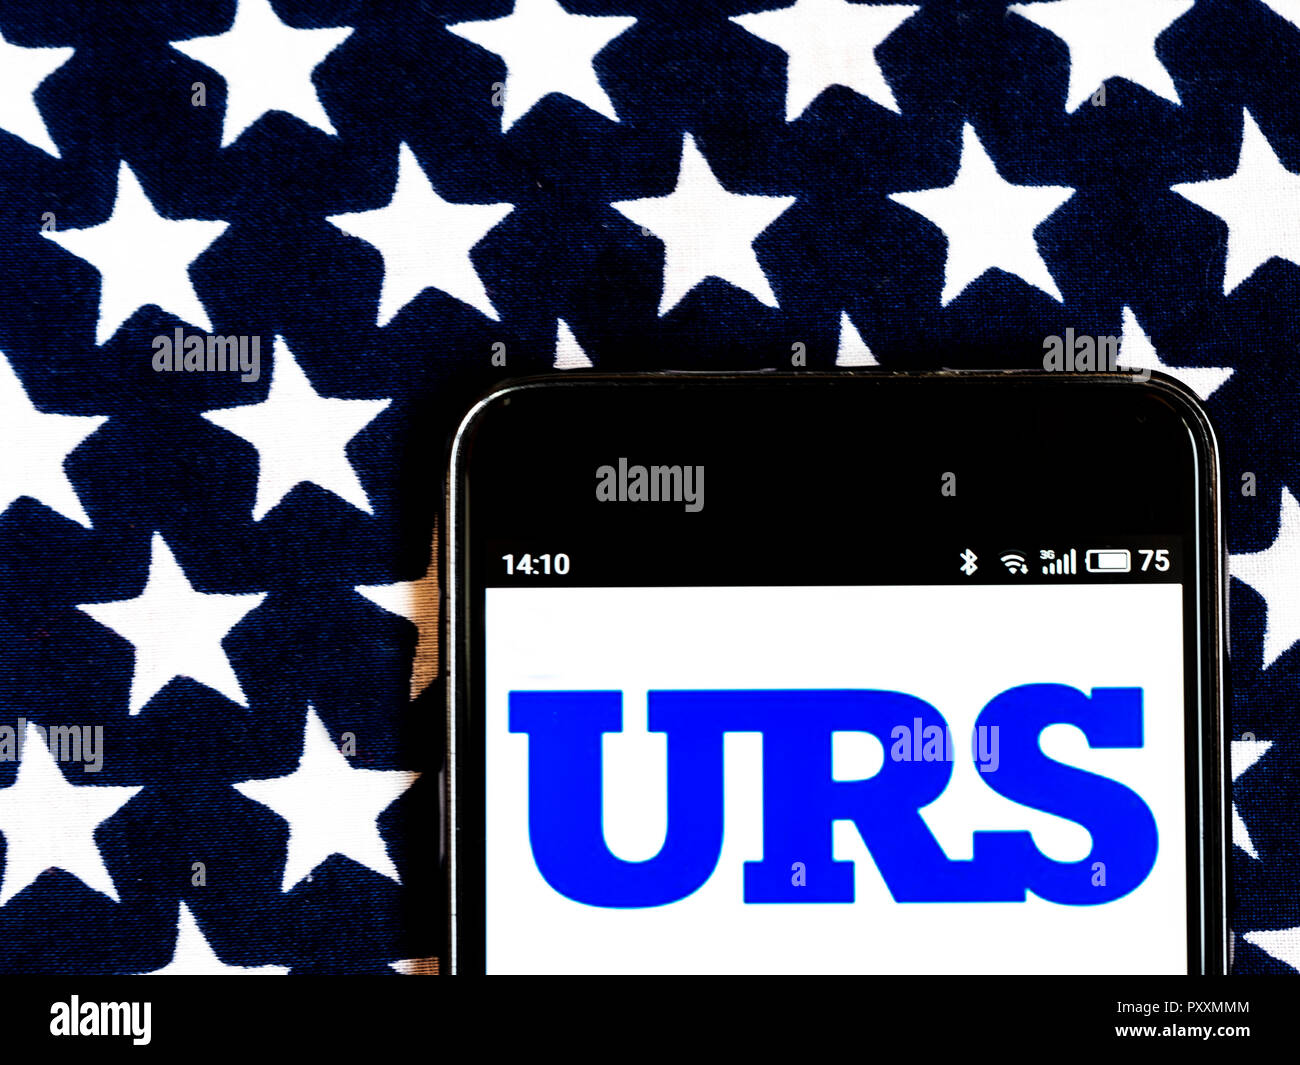 URS Corporation Engineering and design company  logo seen displayed on smart phone. URS Corporation was an engineering, design, and construction firm and a U.S. federal government contractor. Headquartered in San Francisco, California, URS was a full-service, global organization with offices located in the Americas, Europe, Africa, and Asia-Pacific. Stock Photo